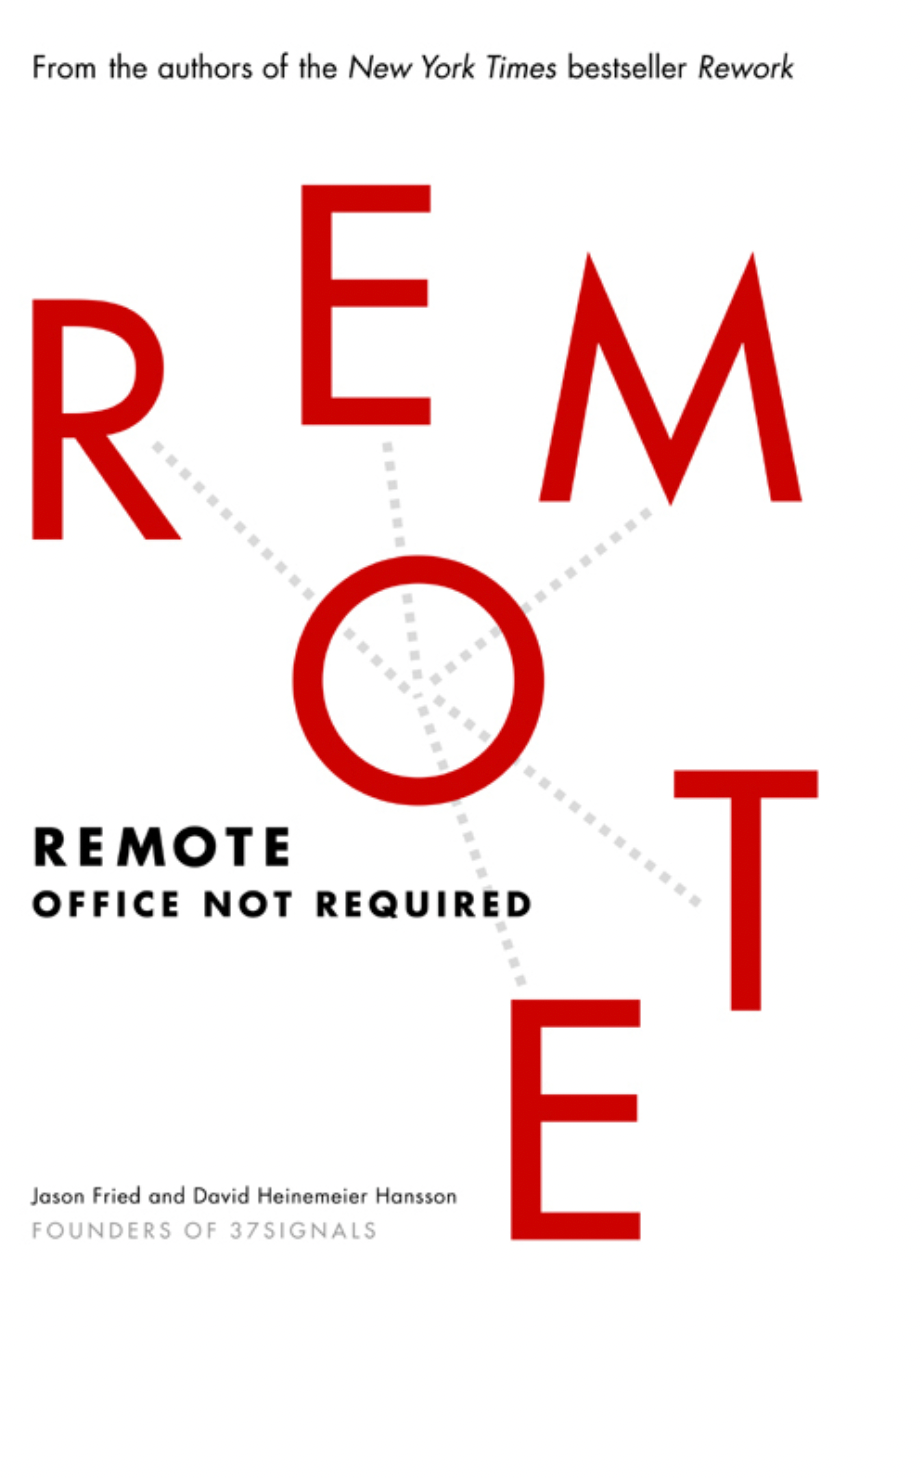 Book cover of Remote: Office Not Required by Jason Fried and David Heinemeir Hansson